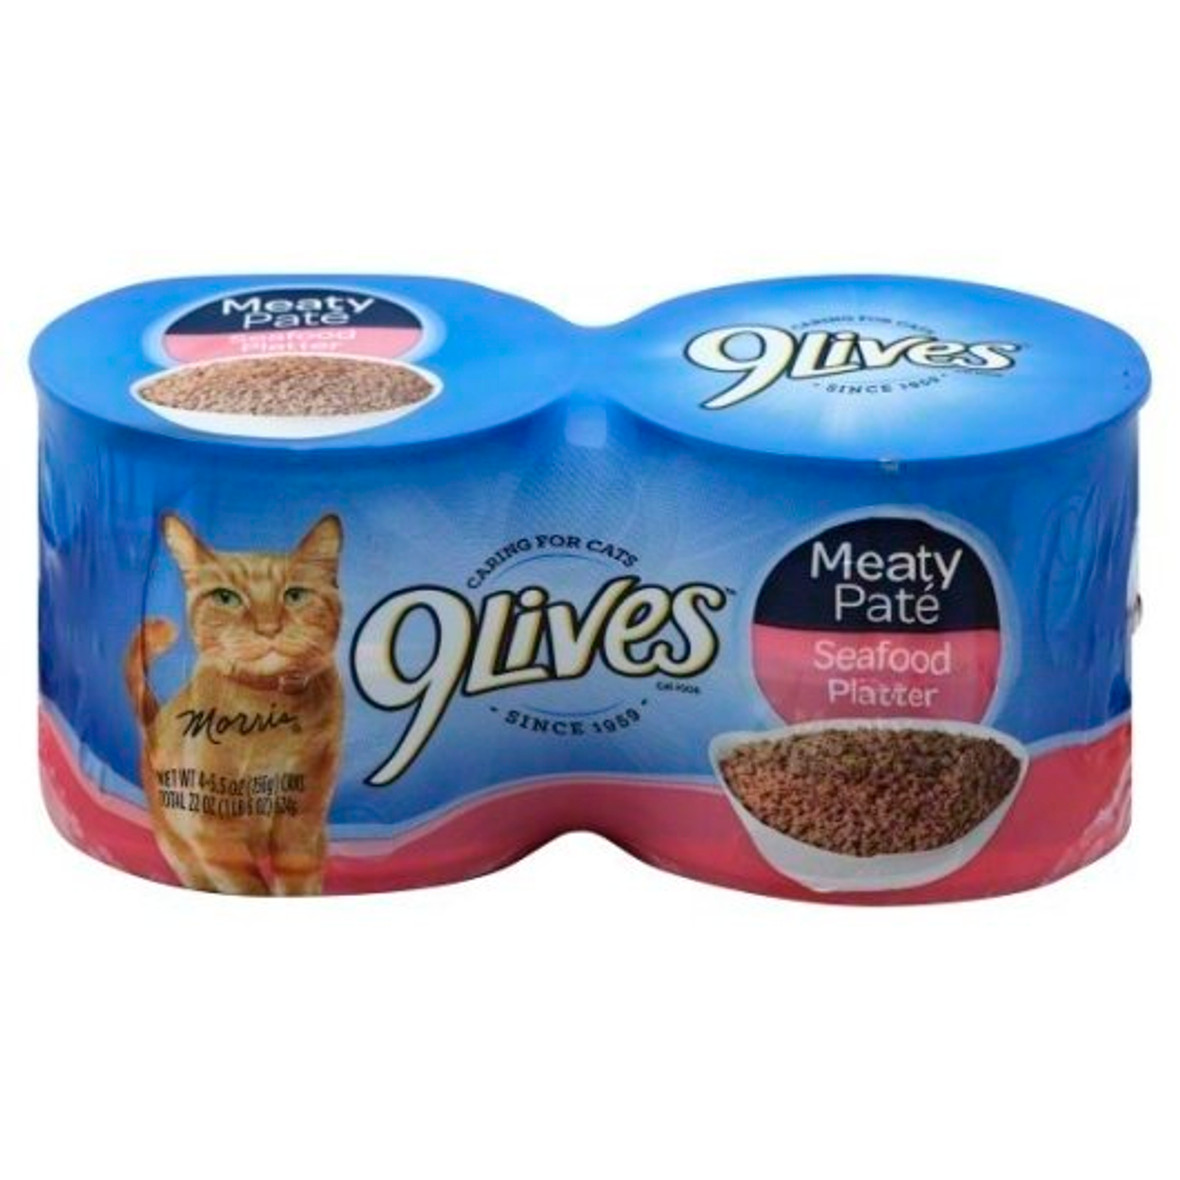 9 Lives Meaty Pate Seafood Platter Cat Food Singles, 22 Ounces, 6 Per Case